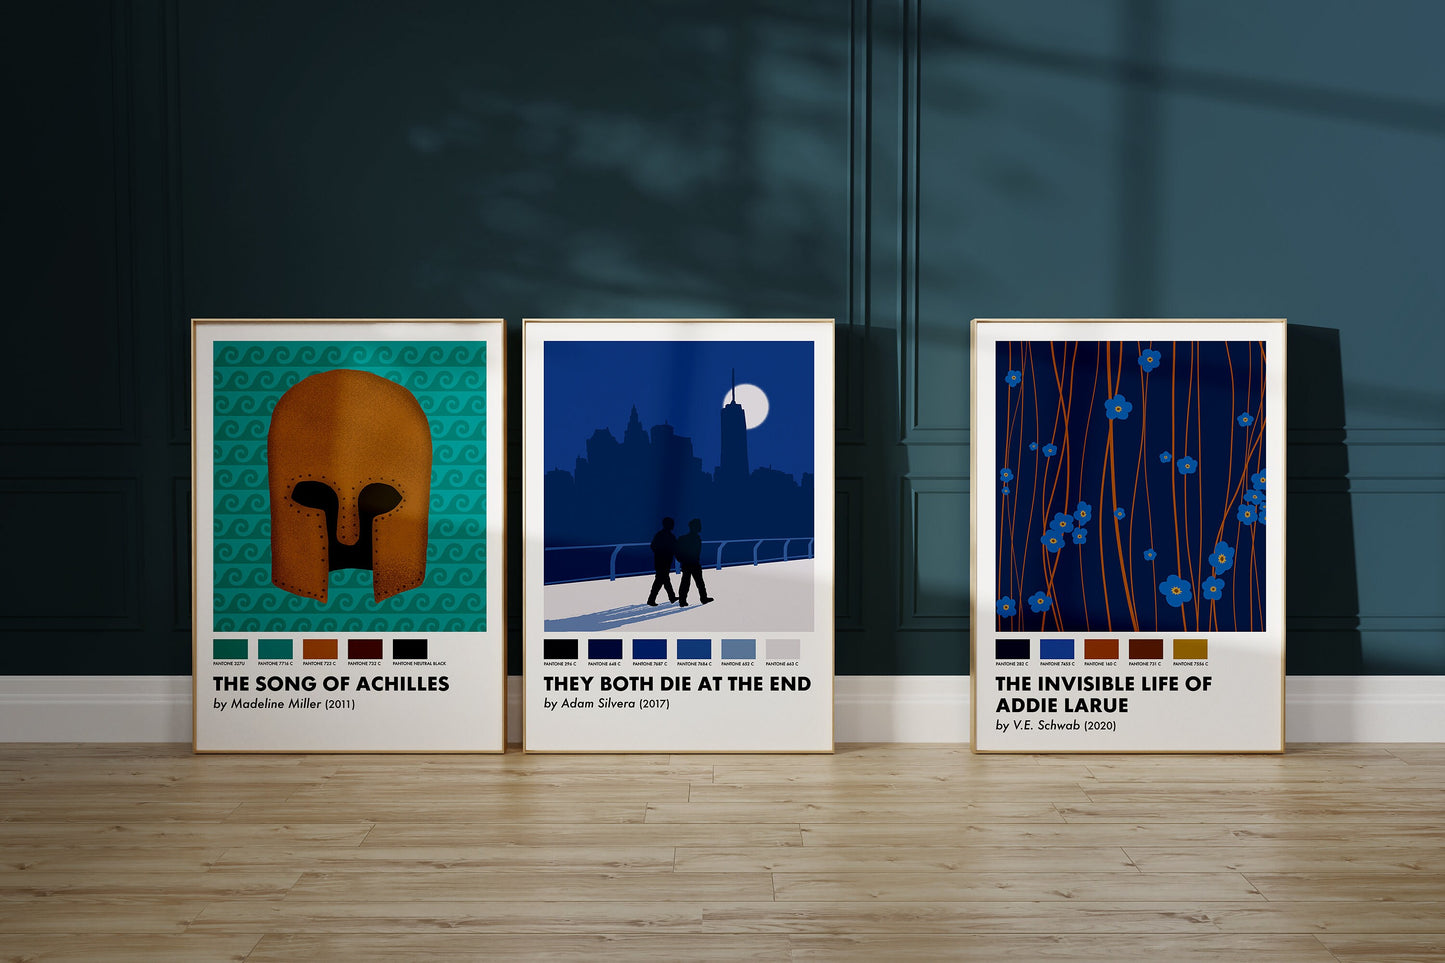 They Both Die at the End Inspired Art Print - The Pantone Collection